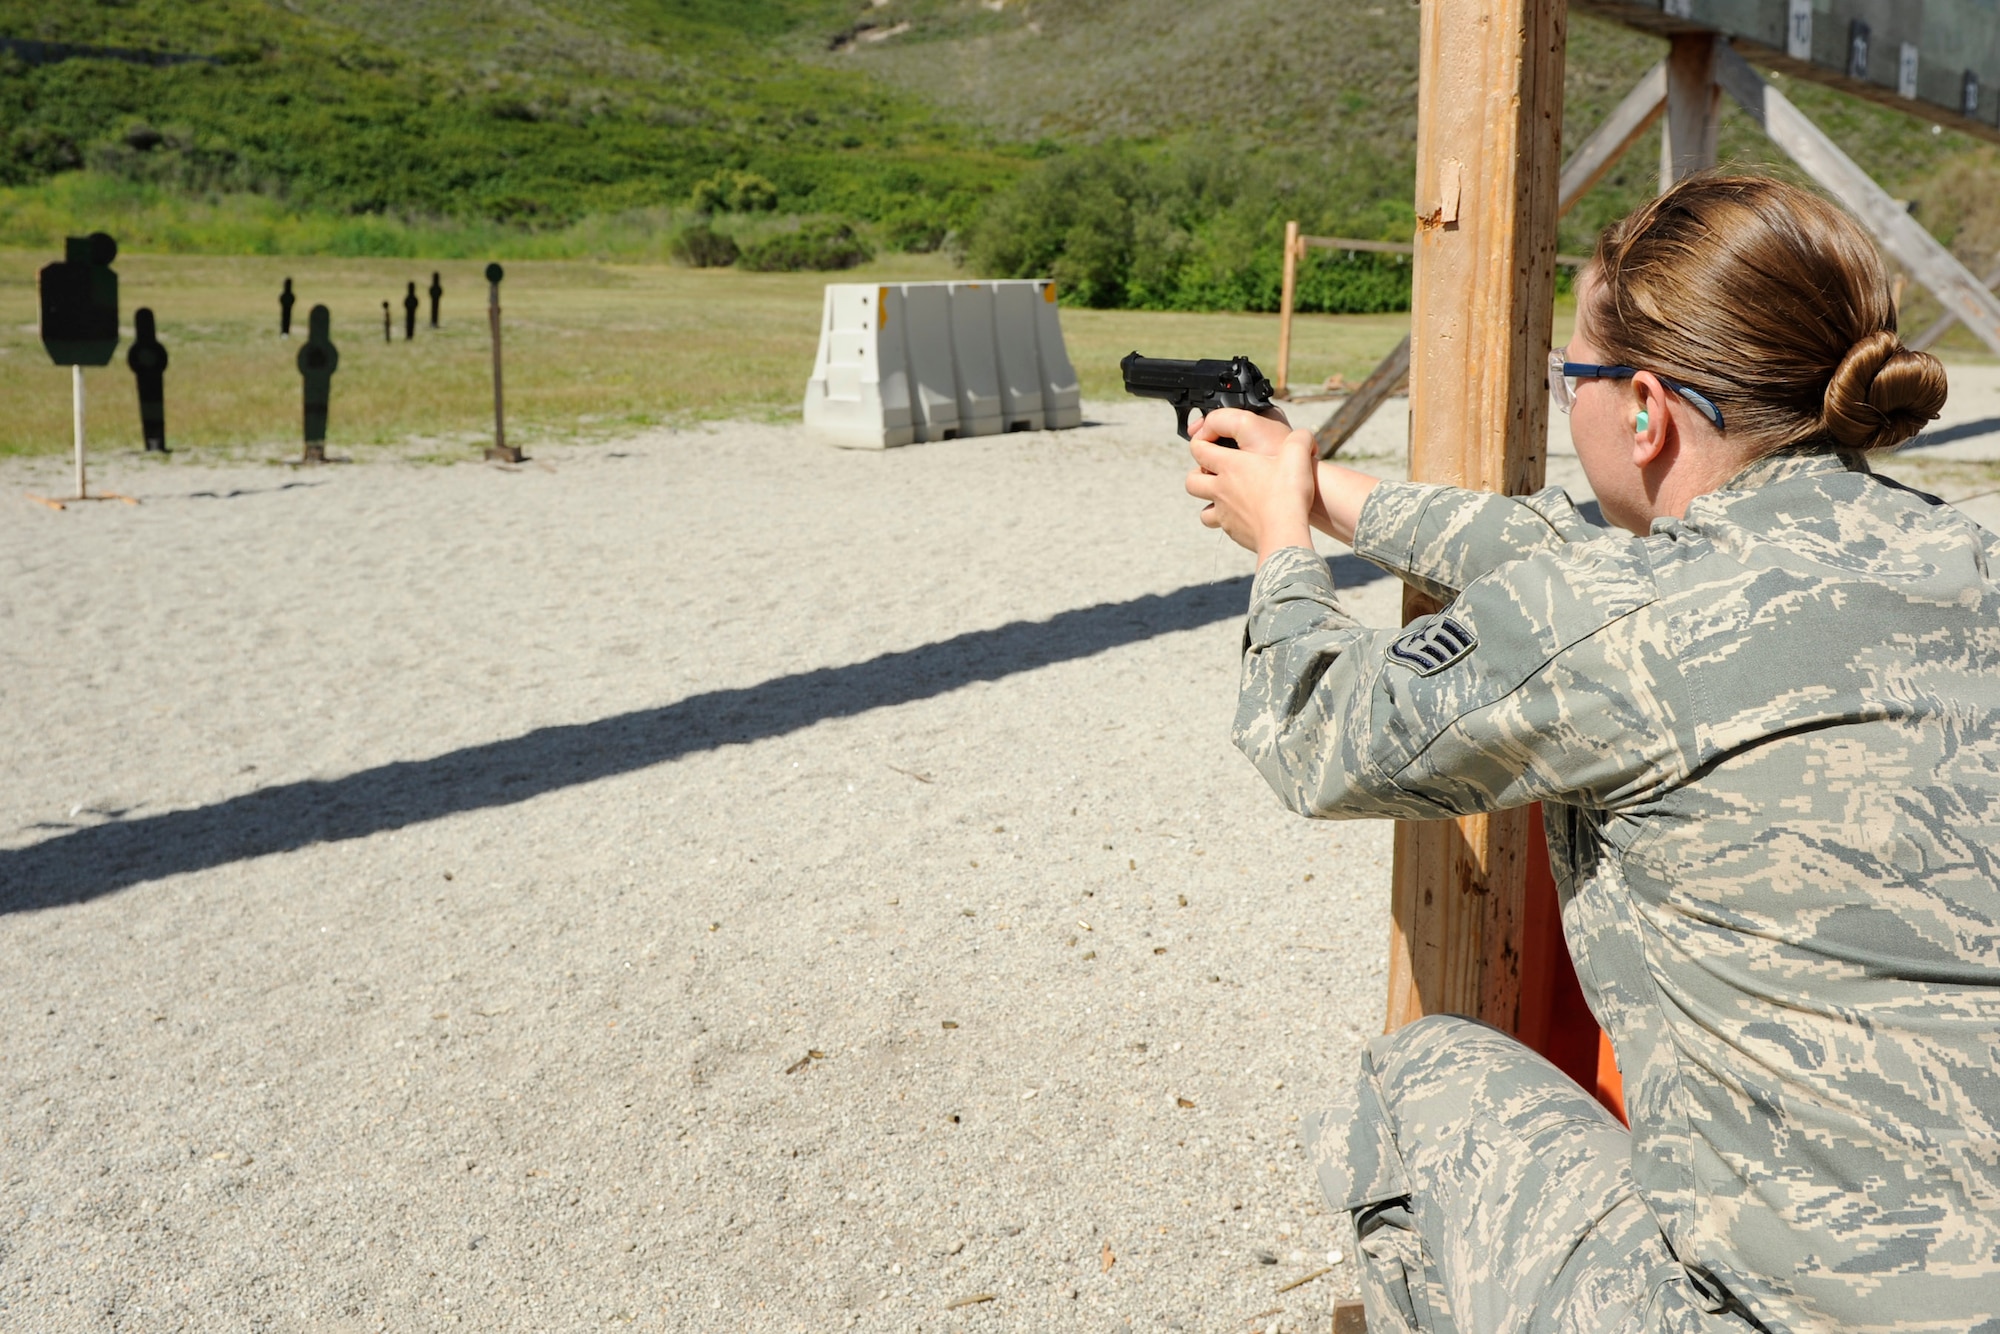 VANDENBERG AIR FORCE BASE, Calif.-- Staff Sgt. Jennifer Cunningham, an Airman Leadership School instructor, shoots at targets during a pistol competition at the combat arms training range here Monday, May 14, 2012. The competition was held in conjunction with National Police Week, an annual celebration that recognizes the service and sacrifice of U.S. law enforcement personnel. (U.S. Air Force photo/Staff Sgt. Levi Riendeau)